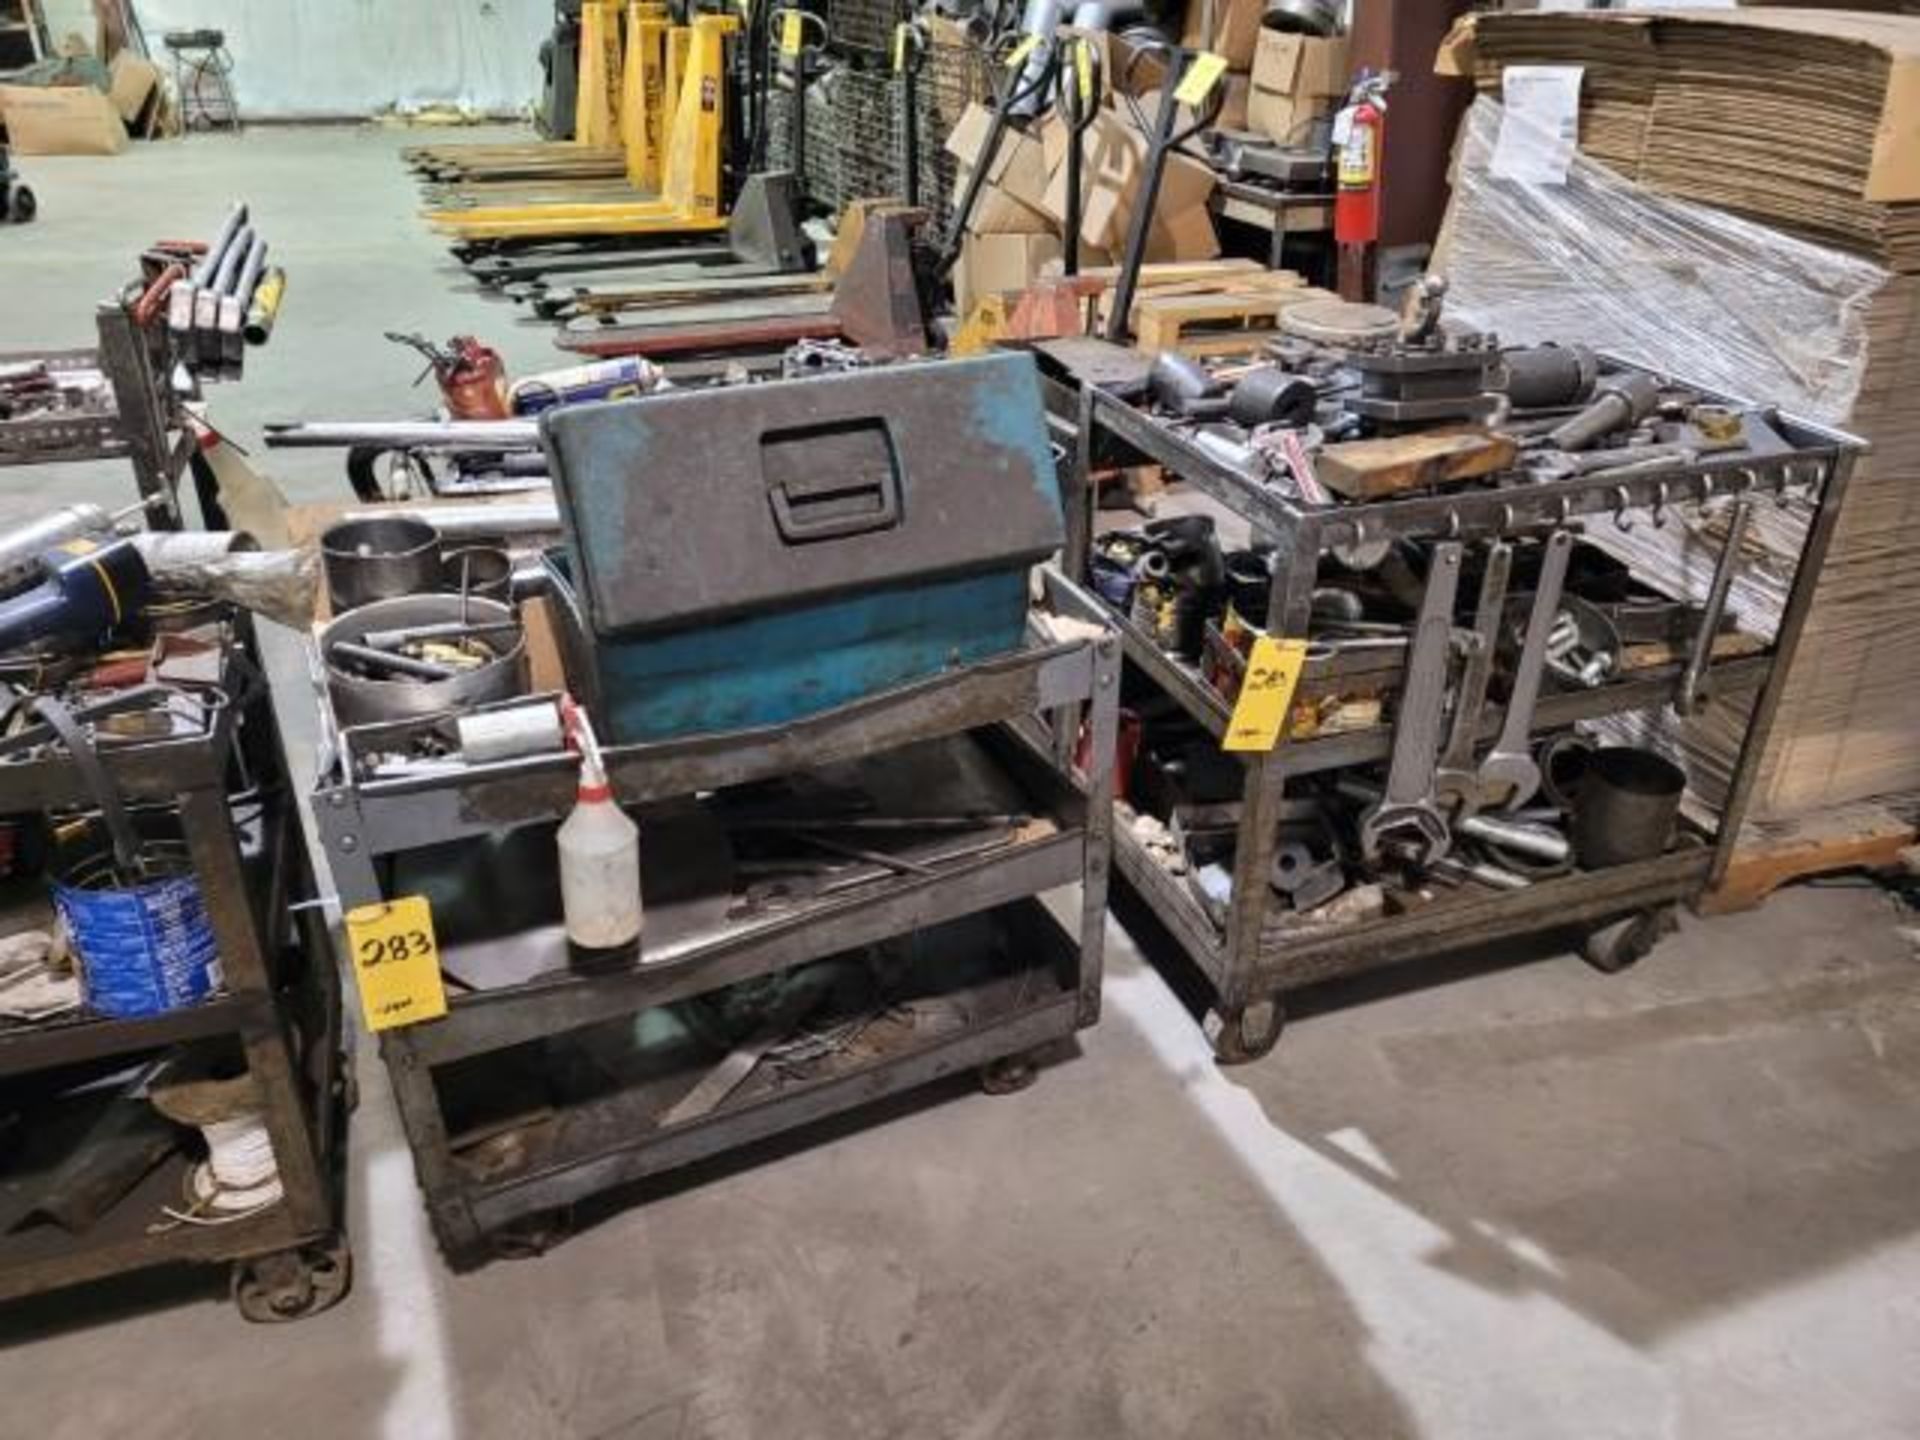 LOT: (6) Utility Carts w/ Hand Tools Consisting of: Sockets, Wrenches, Tool Boxes, Handles, Nuts, Bo - Image 2 of 5